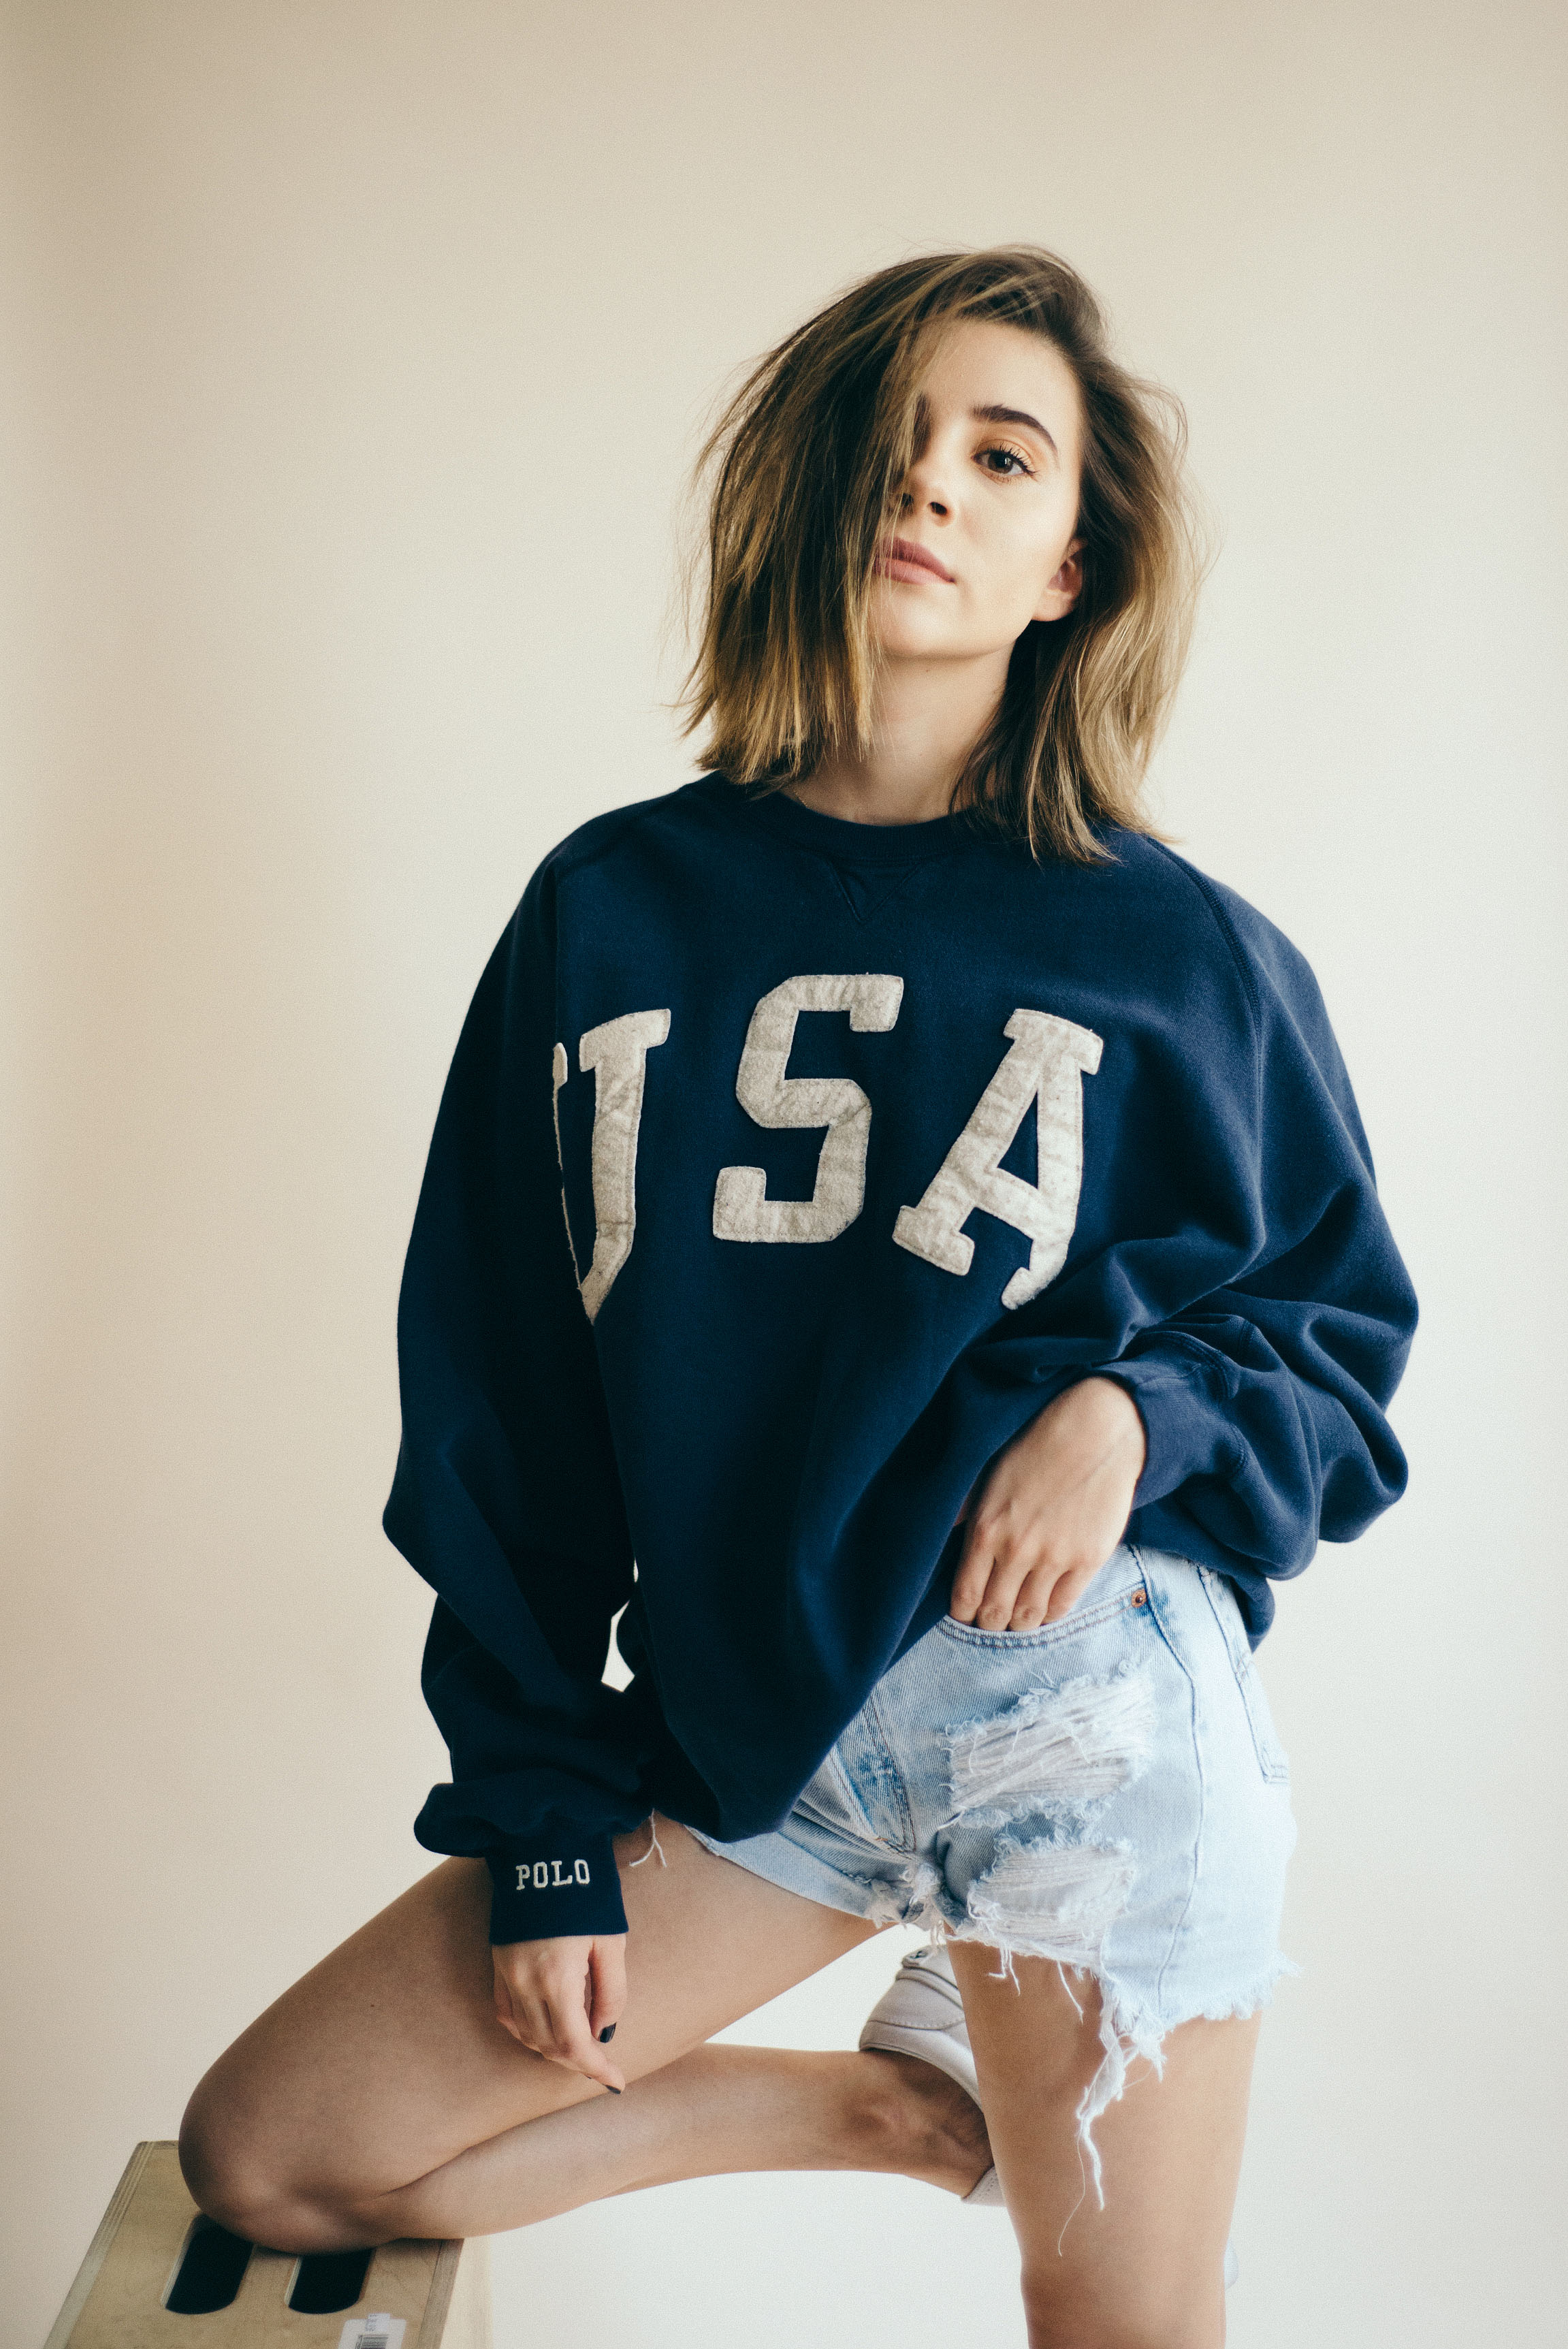  Olivia Stuck for SUSPEND Magazine photographed by Diane Abapo;&nbsp; Polo USA sweatshirt from  Tried &amp; True Co.   